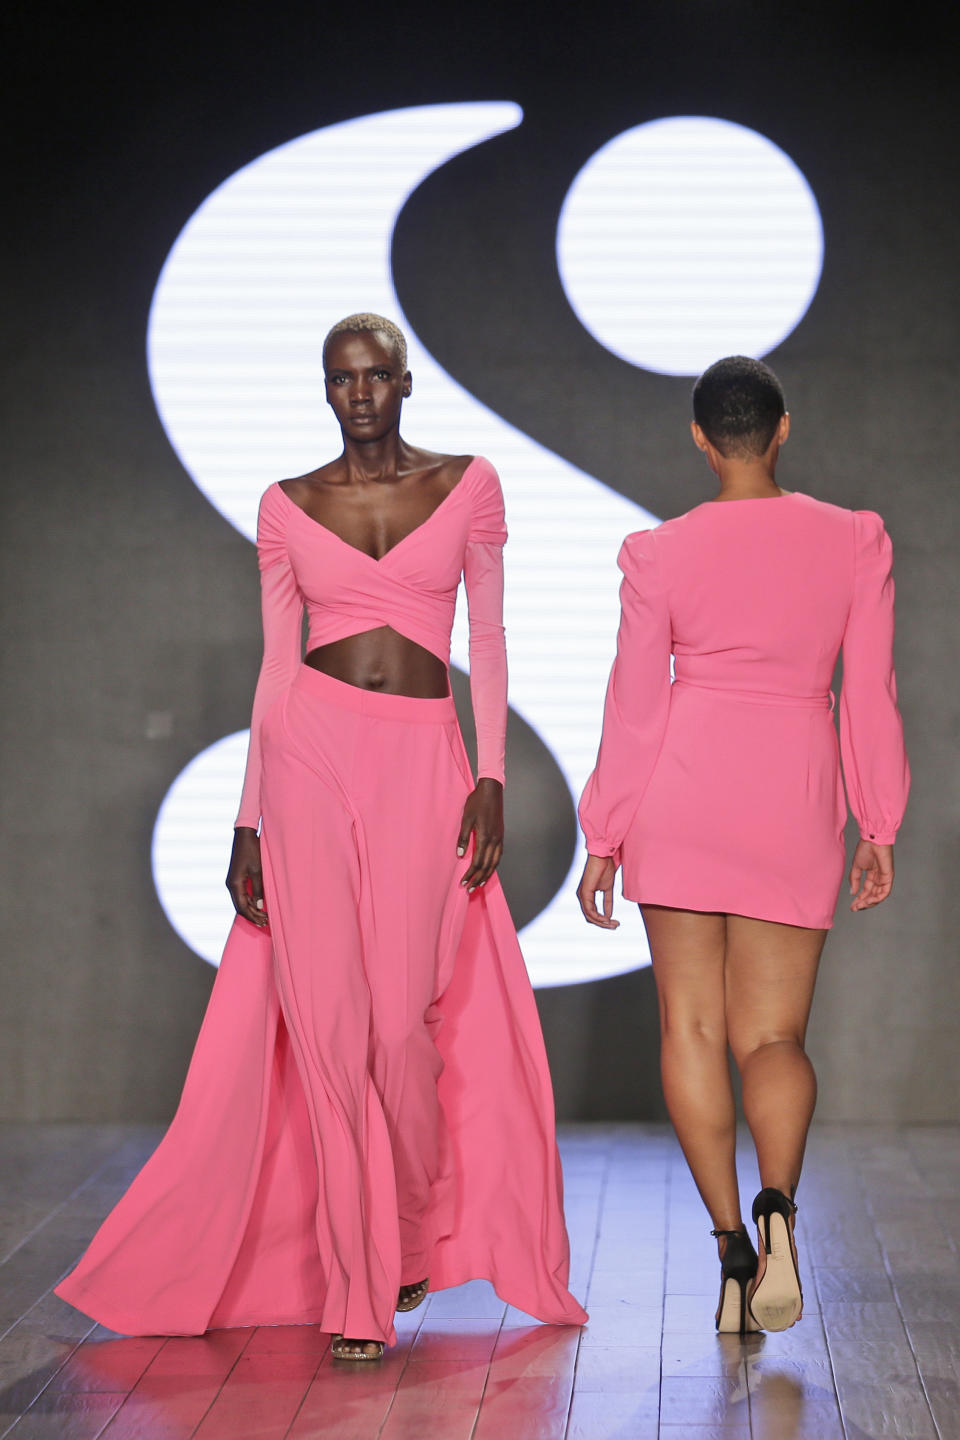 Modesl wear clothes by Serena Williams during Fashion Week in New York, Tuesday, Sept. 10, 2019. (AP Photo/Seth Wenig)